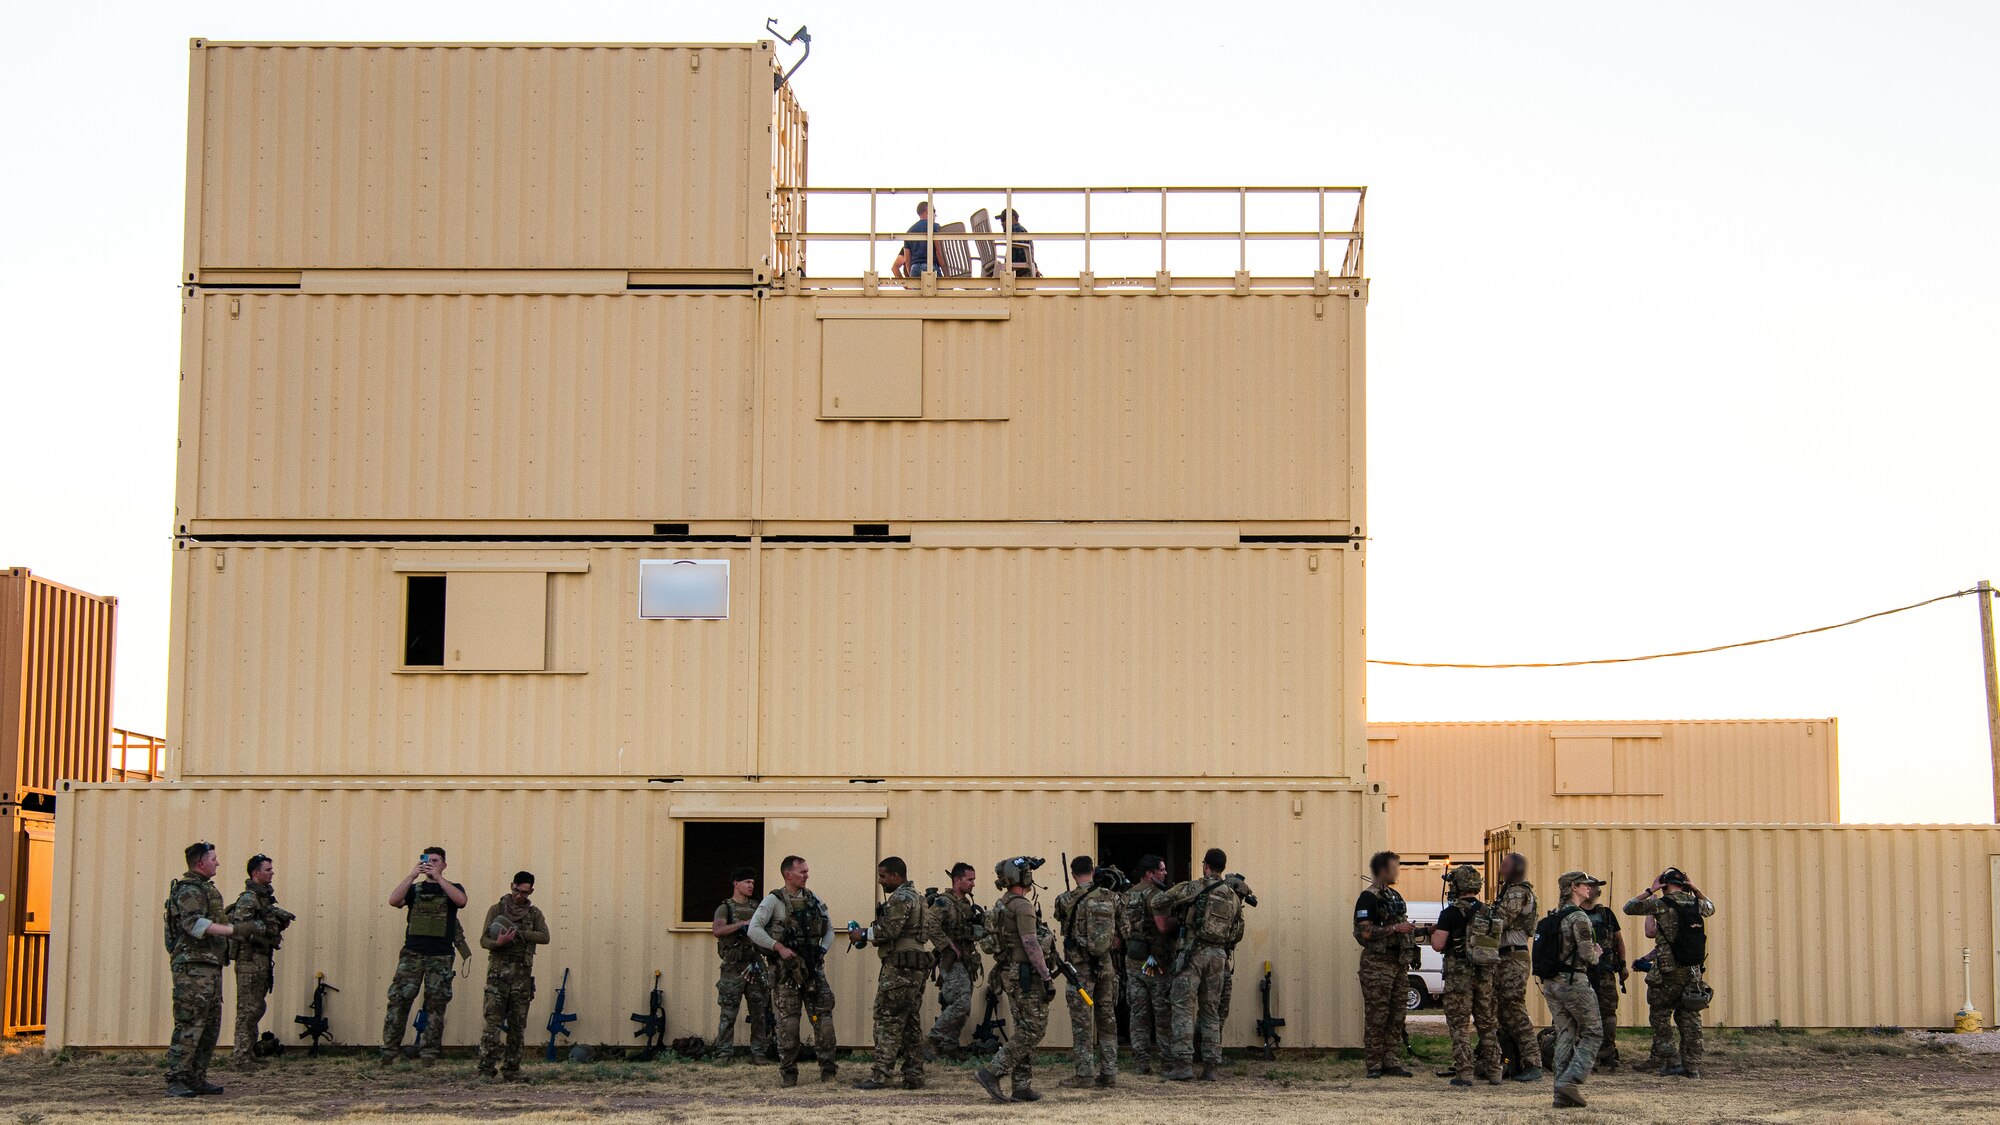 Airman and Solders gather outside of a building made out of metal conex shipping container.